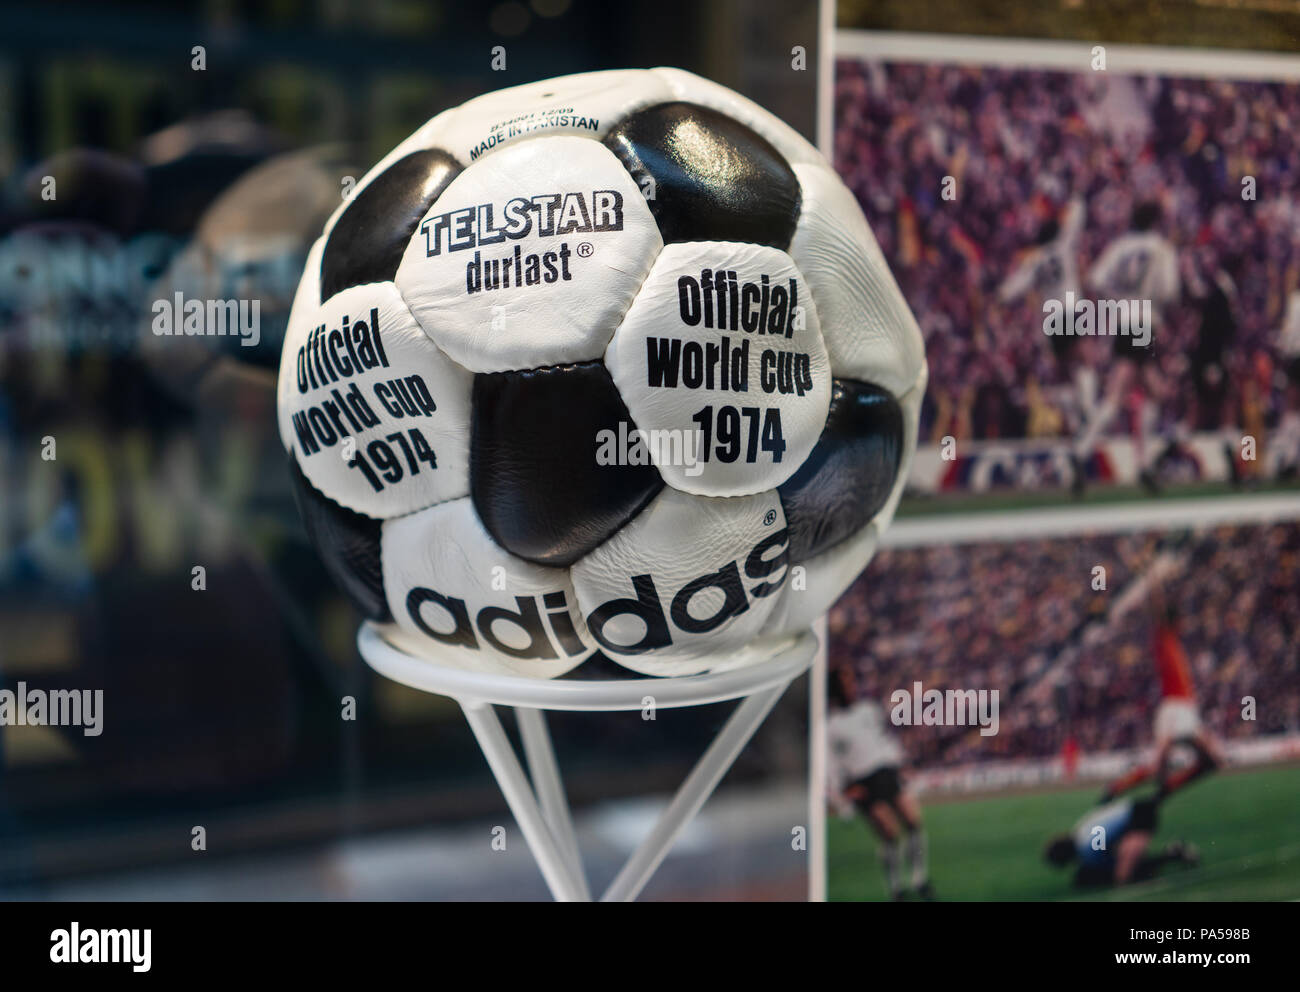 July 7, 2018, Moscow, Russia Official ball FIFA World Cup 1974 in West  Germany Adidas Telstar durlast Stock Photo - Alamy